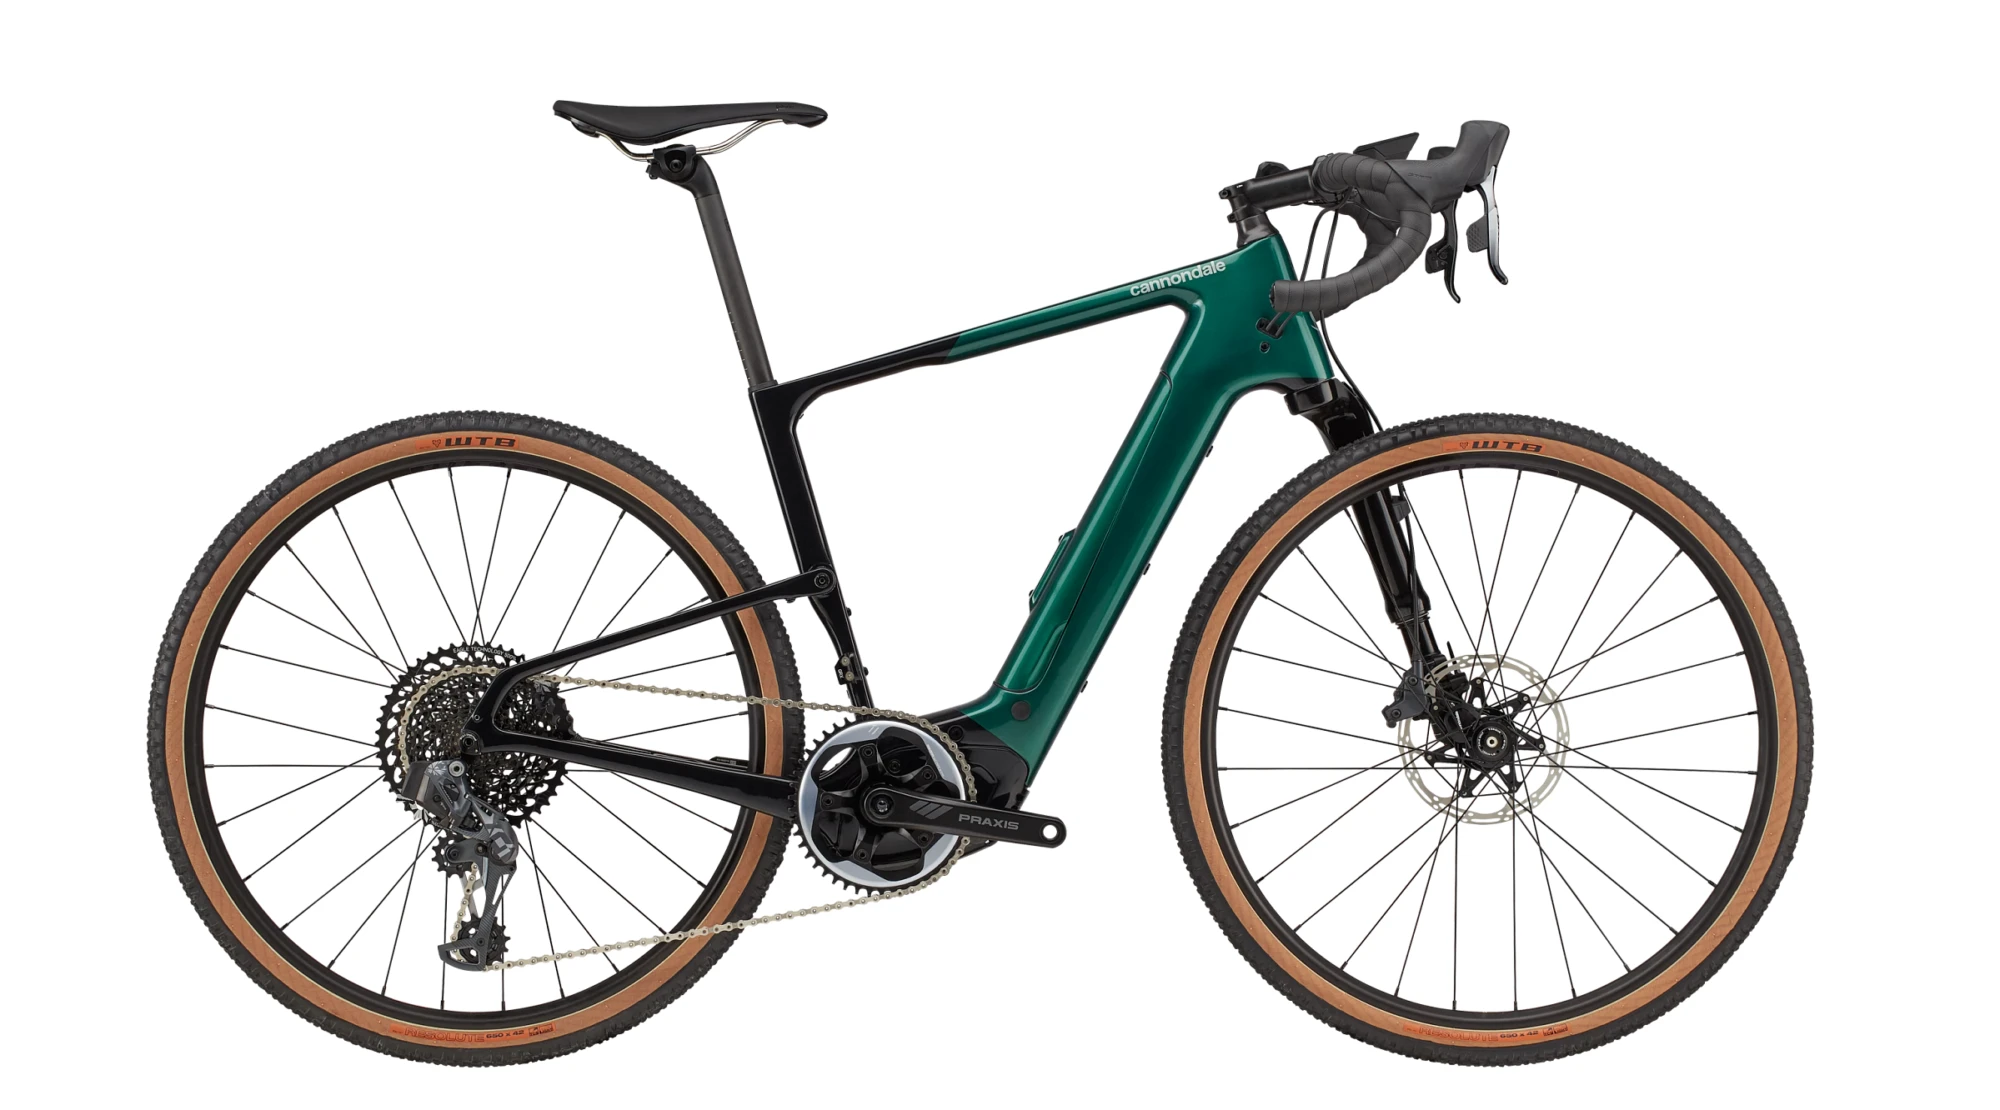 Cannondale ebikes - Best electric bike by brand